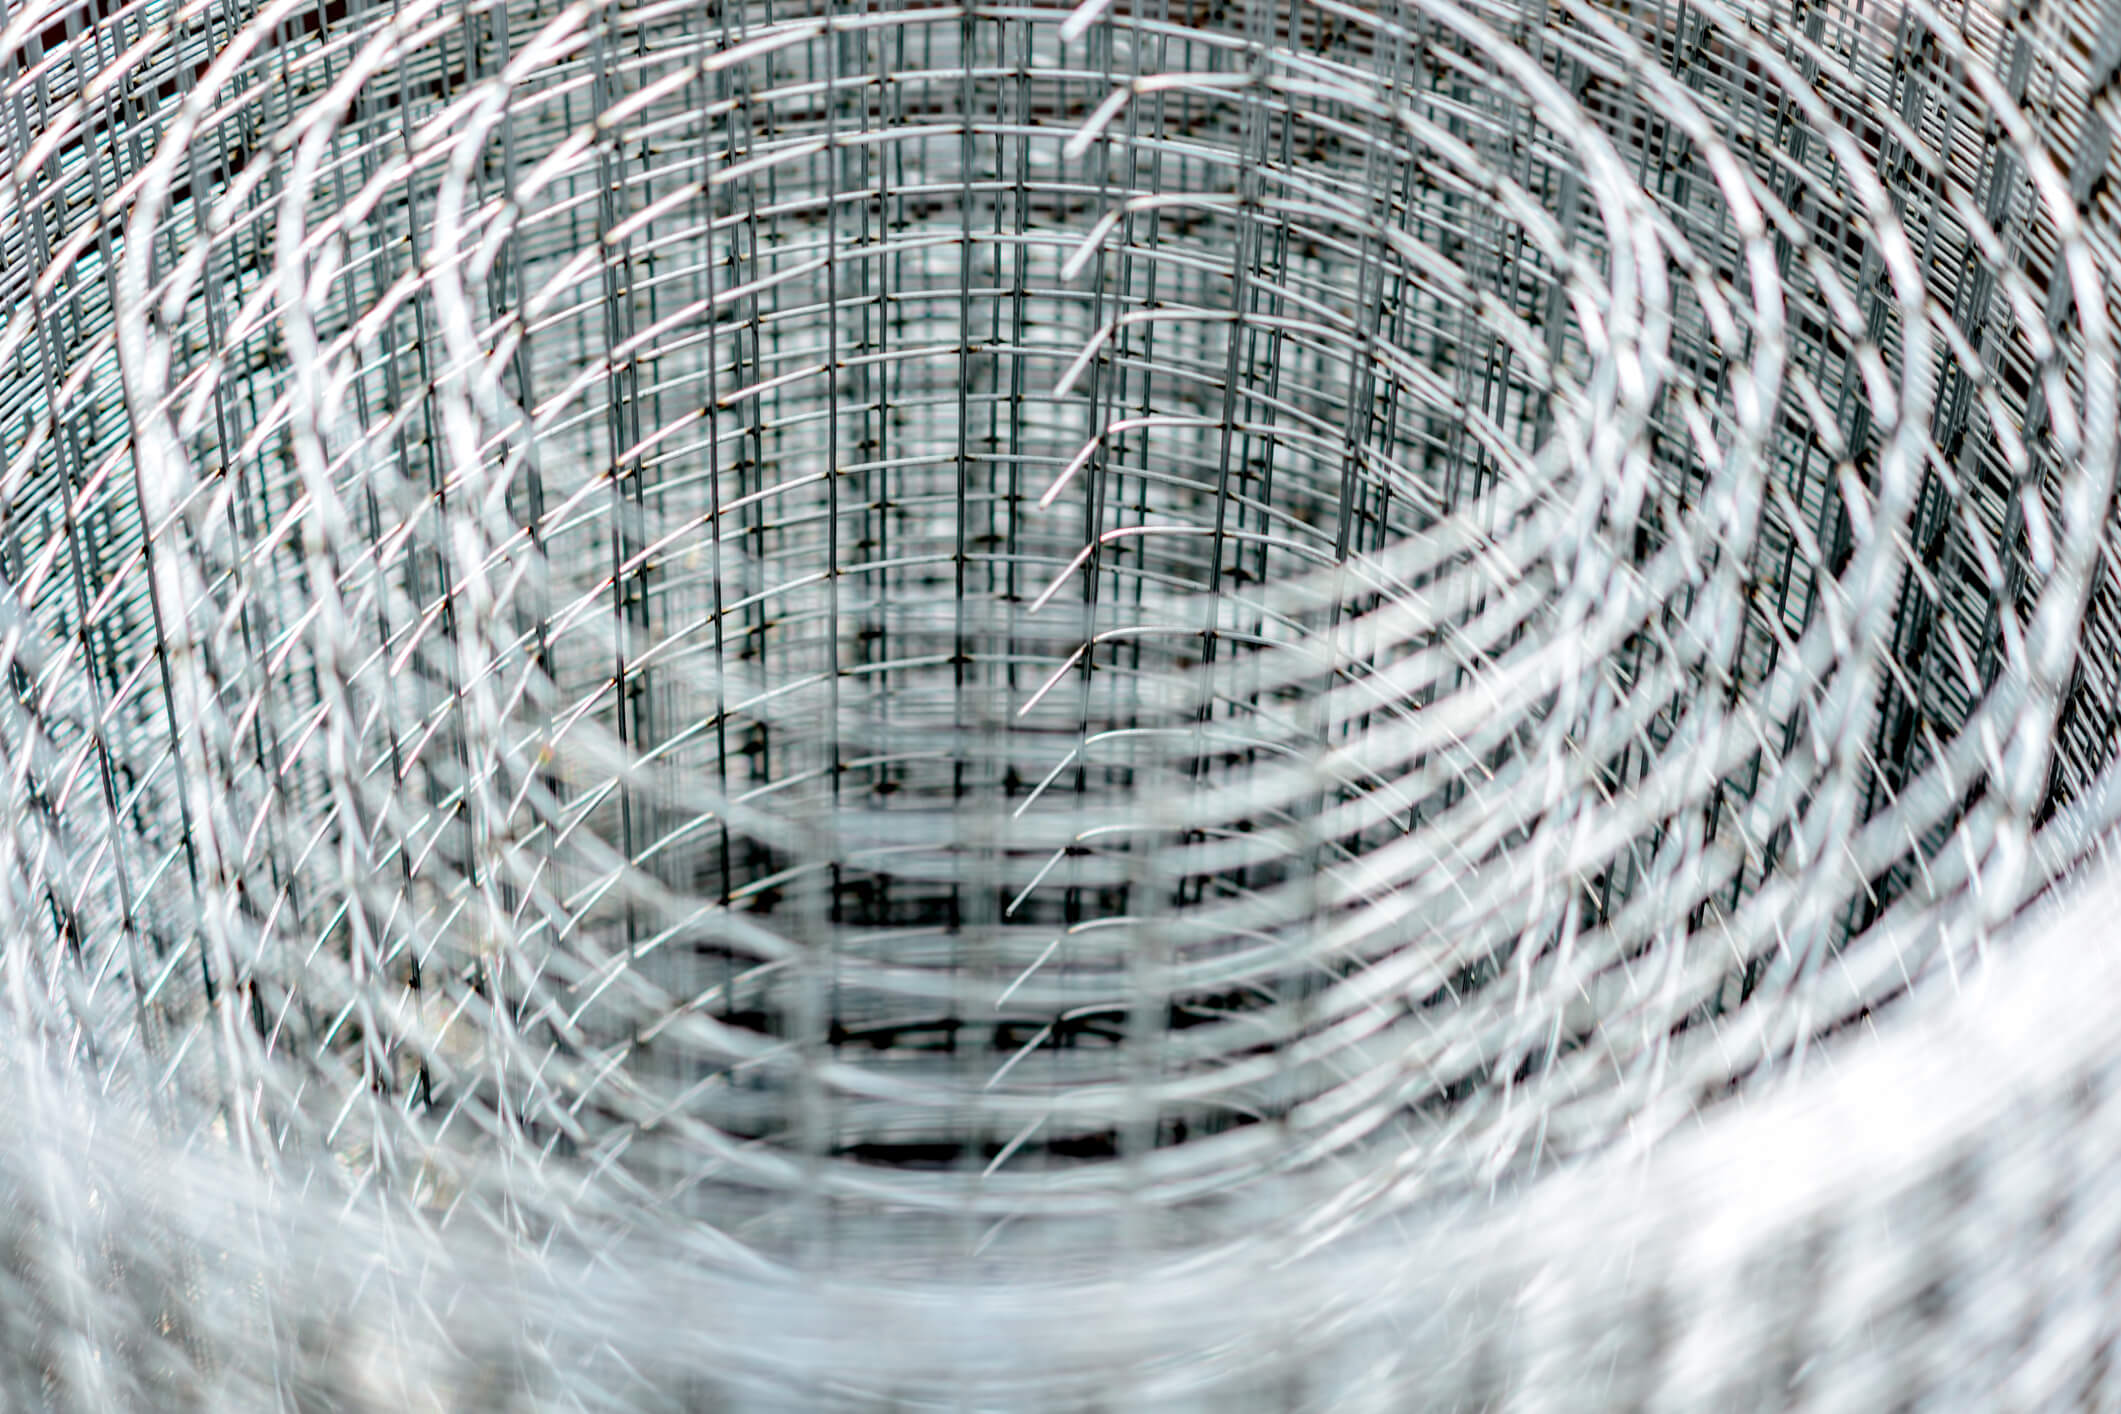 rolled welded wire mesh found at full metal fabrication